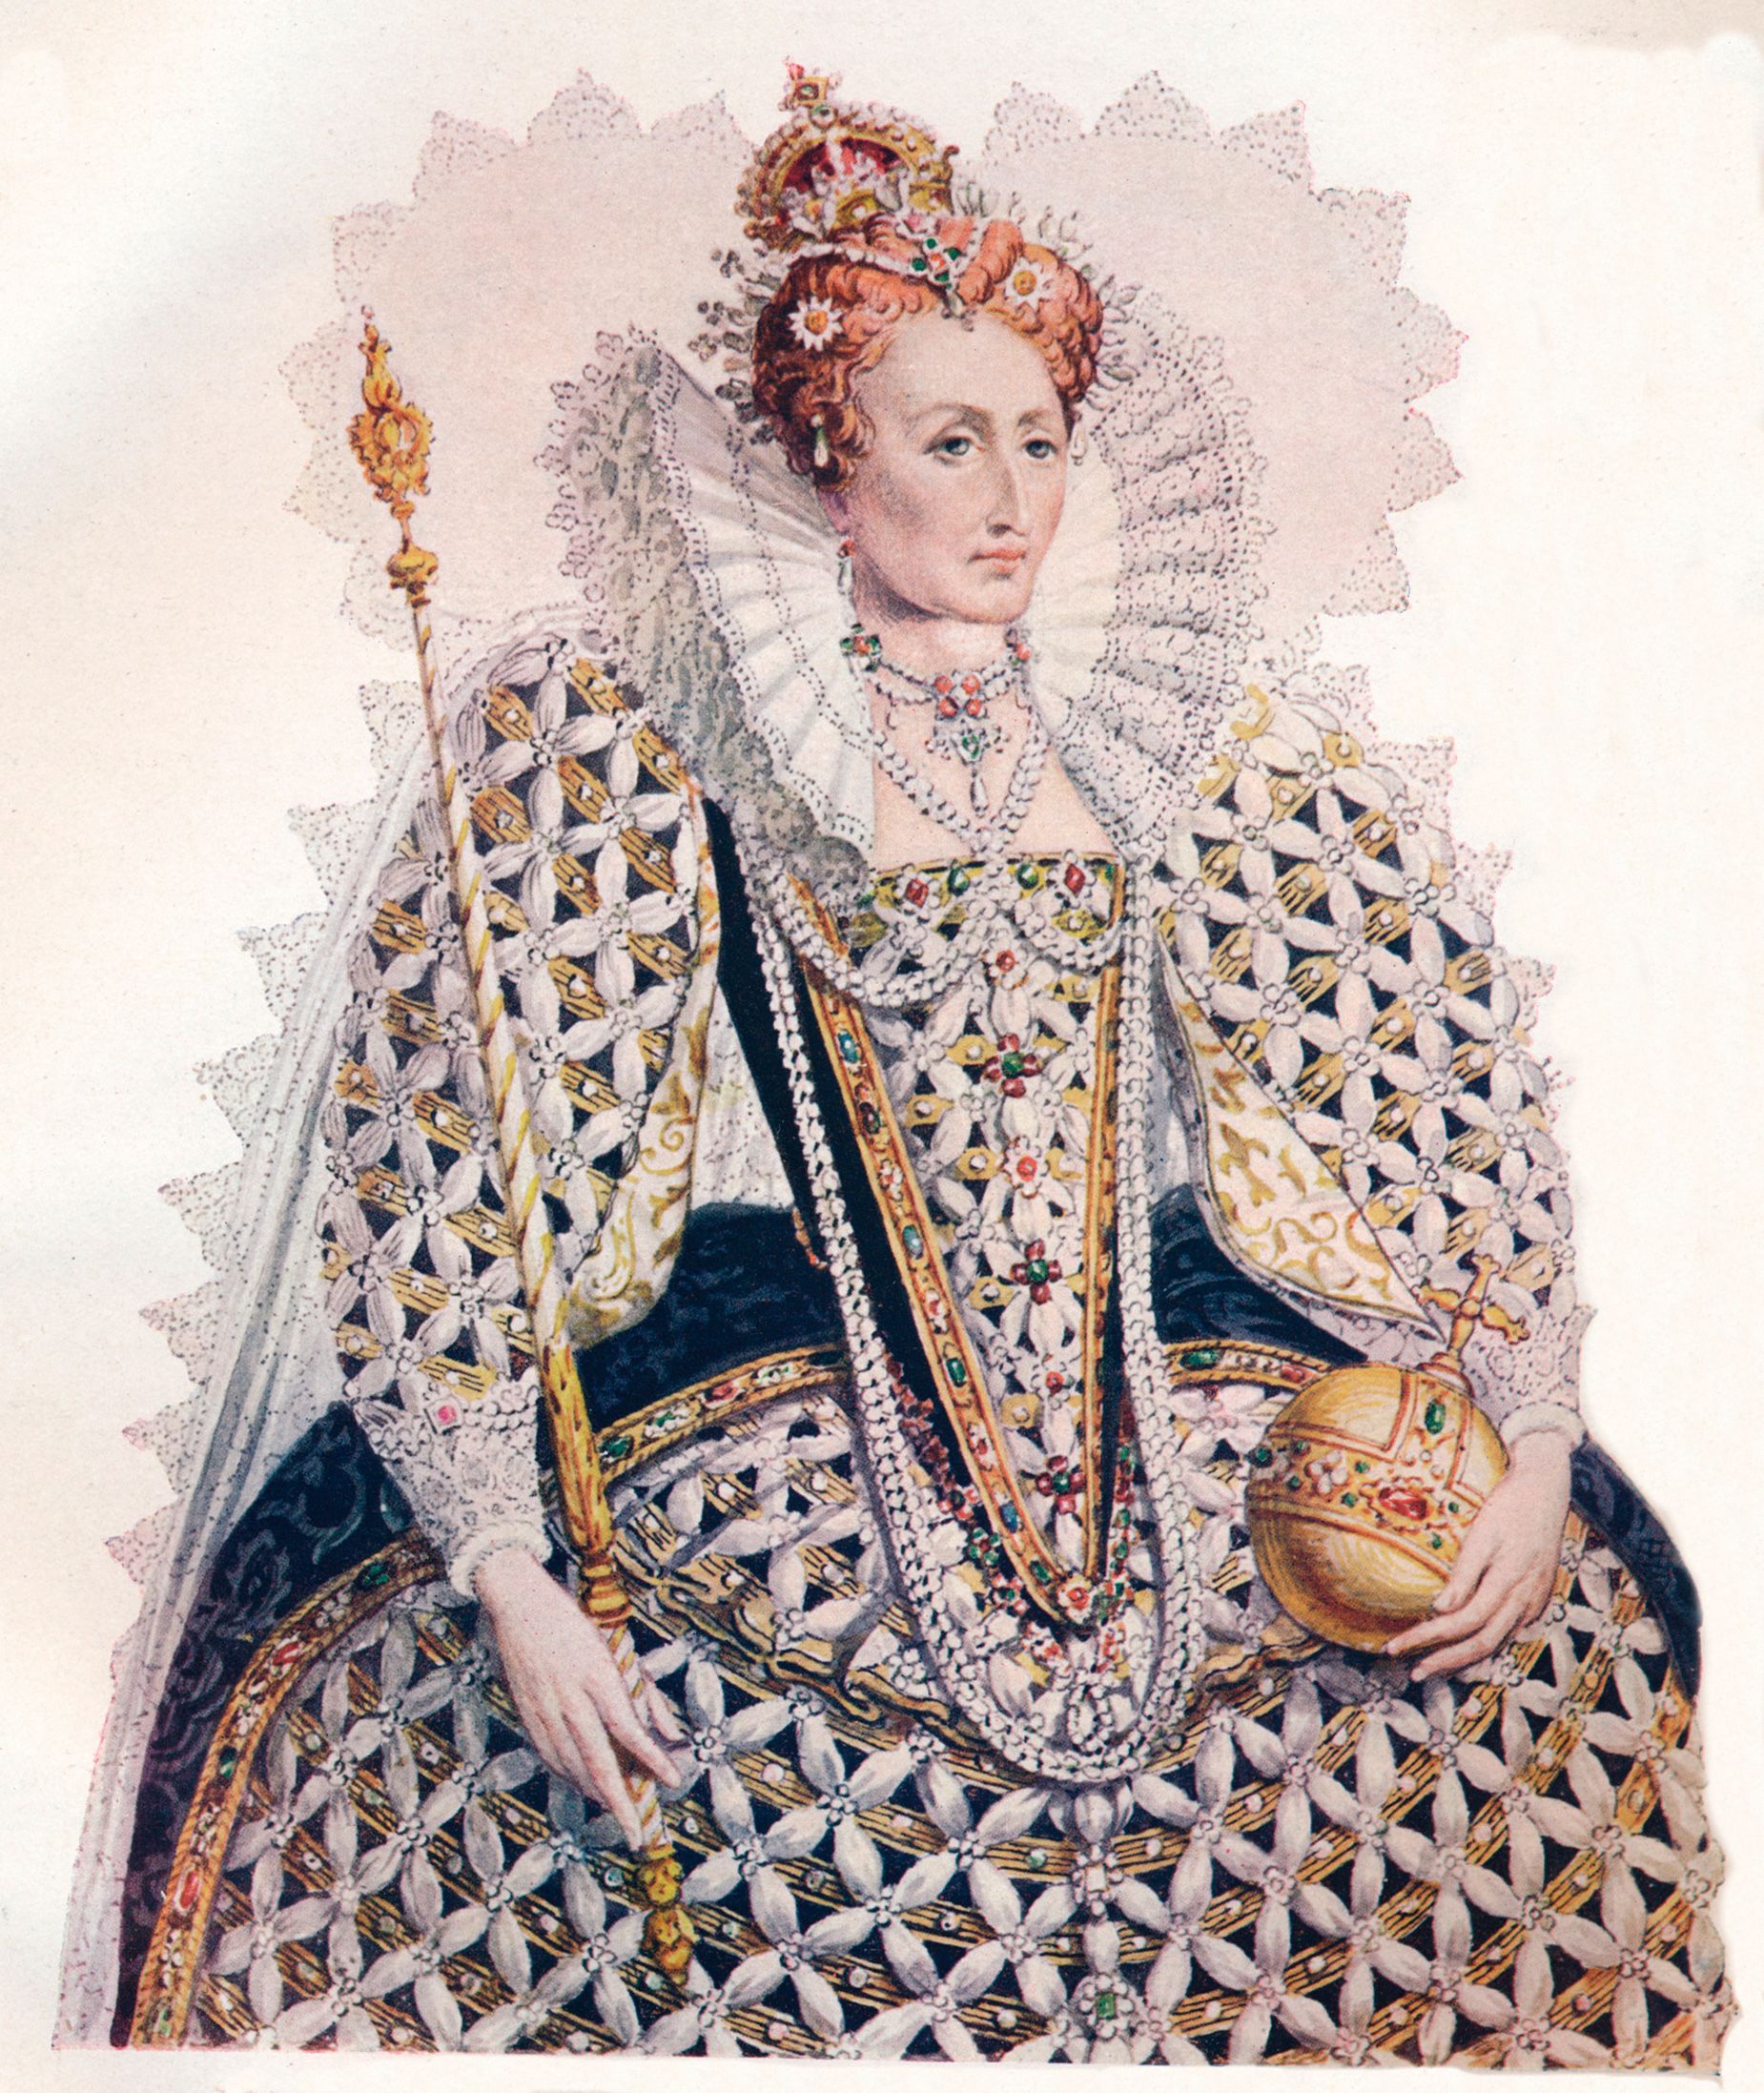 Queen Elizabeth I, who ruled England from 1558 until 1603, was known for her auburn hair — which some suggest was a specially selected wig.